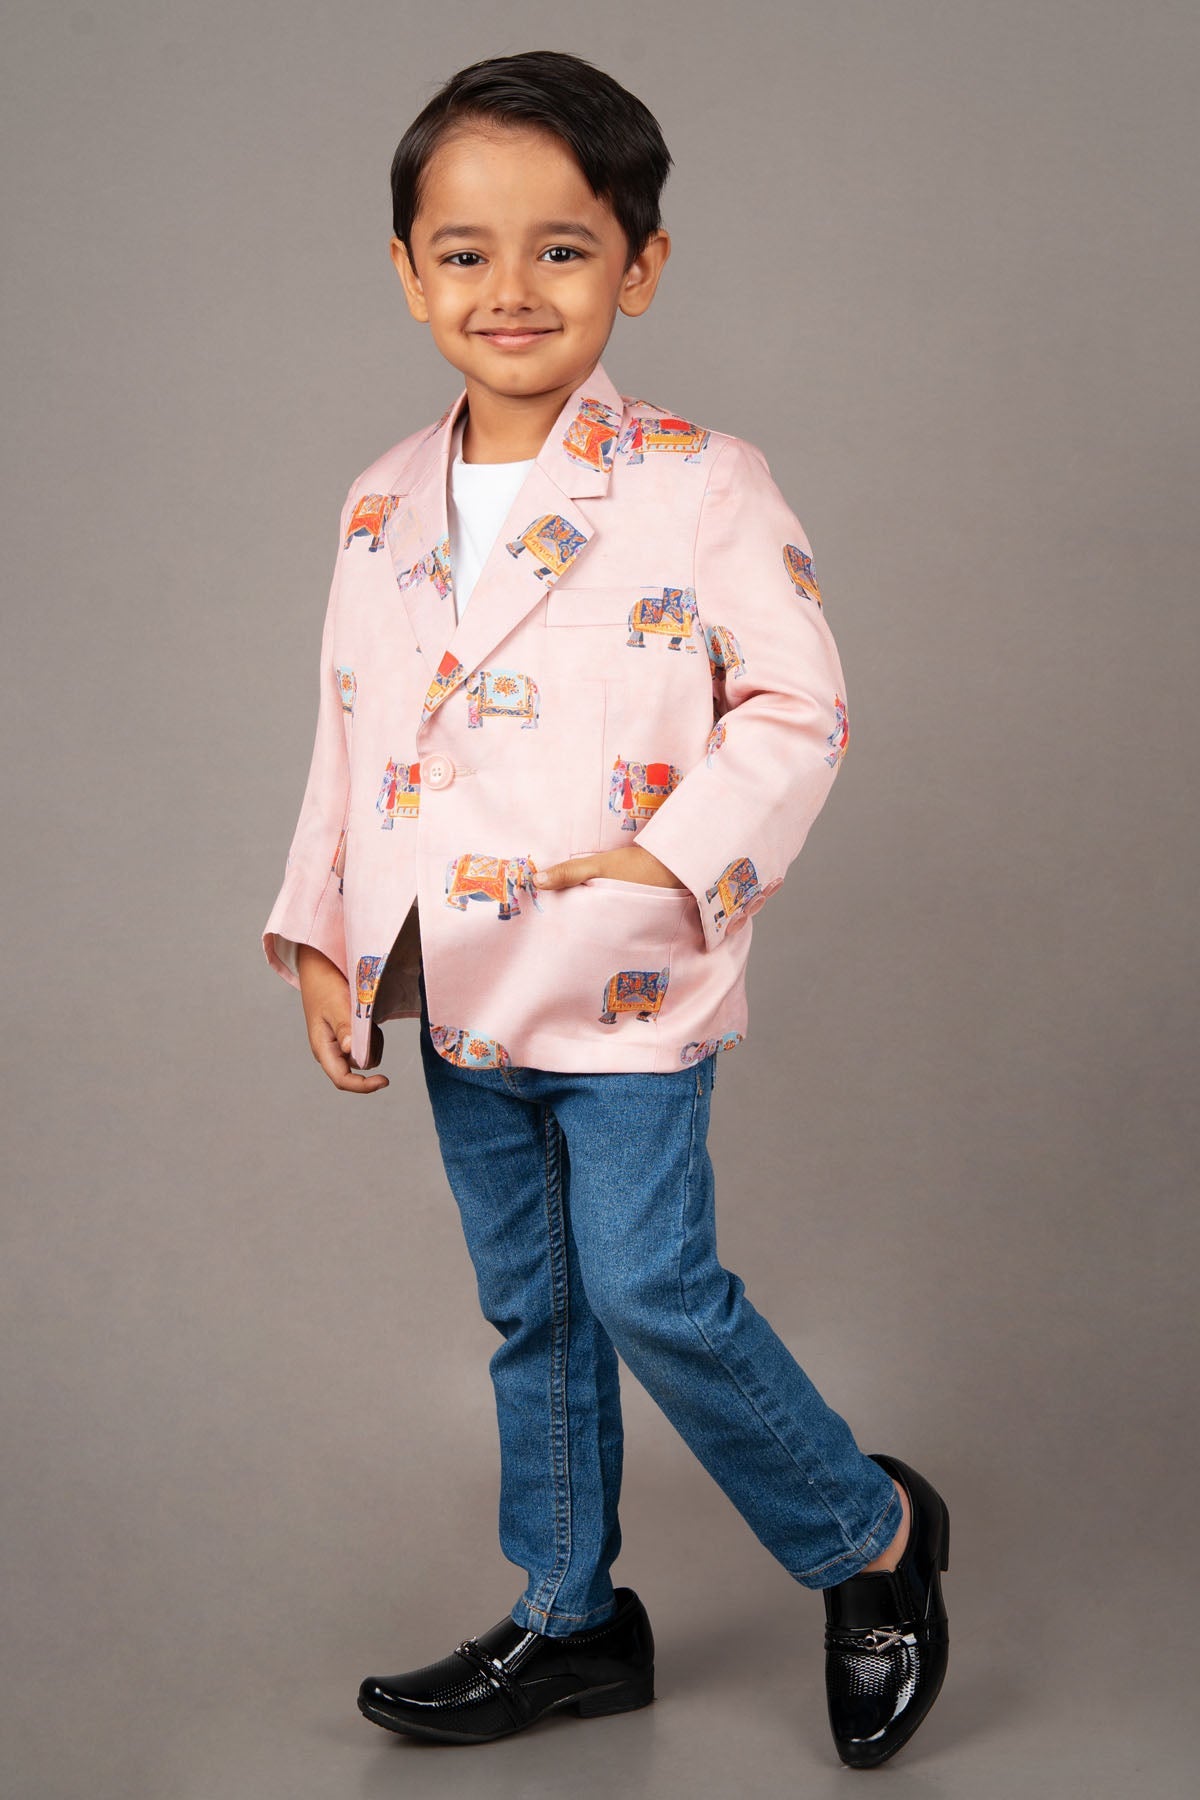 Designer Little Brats Pink Elephant Printed Blazer For young Boys Available online at ScrollnShops